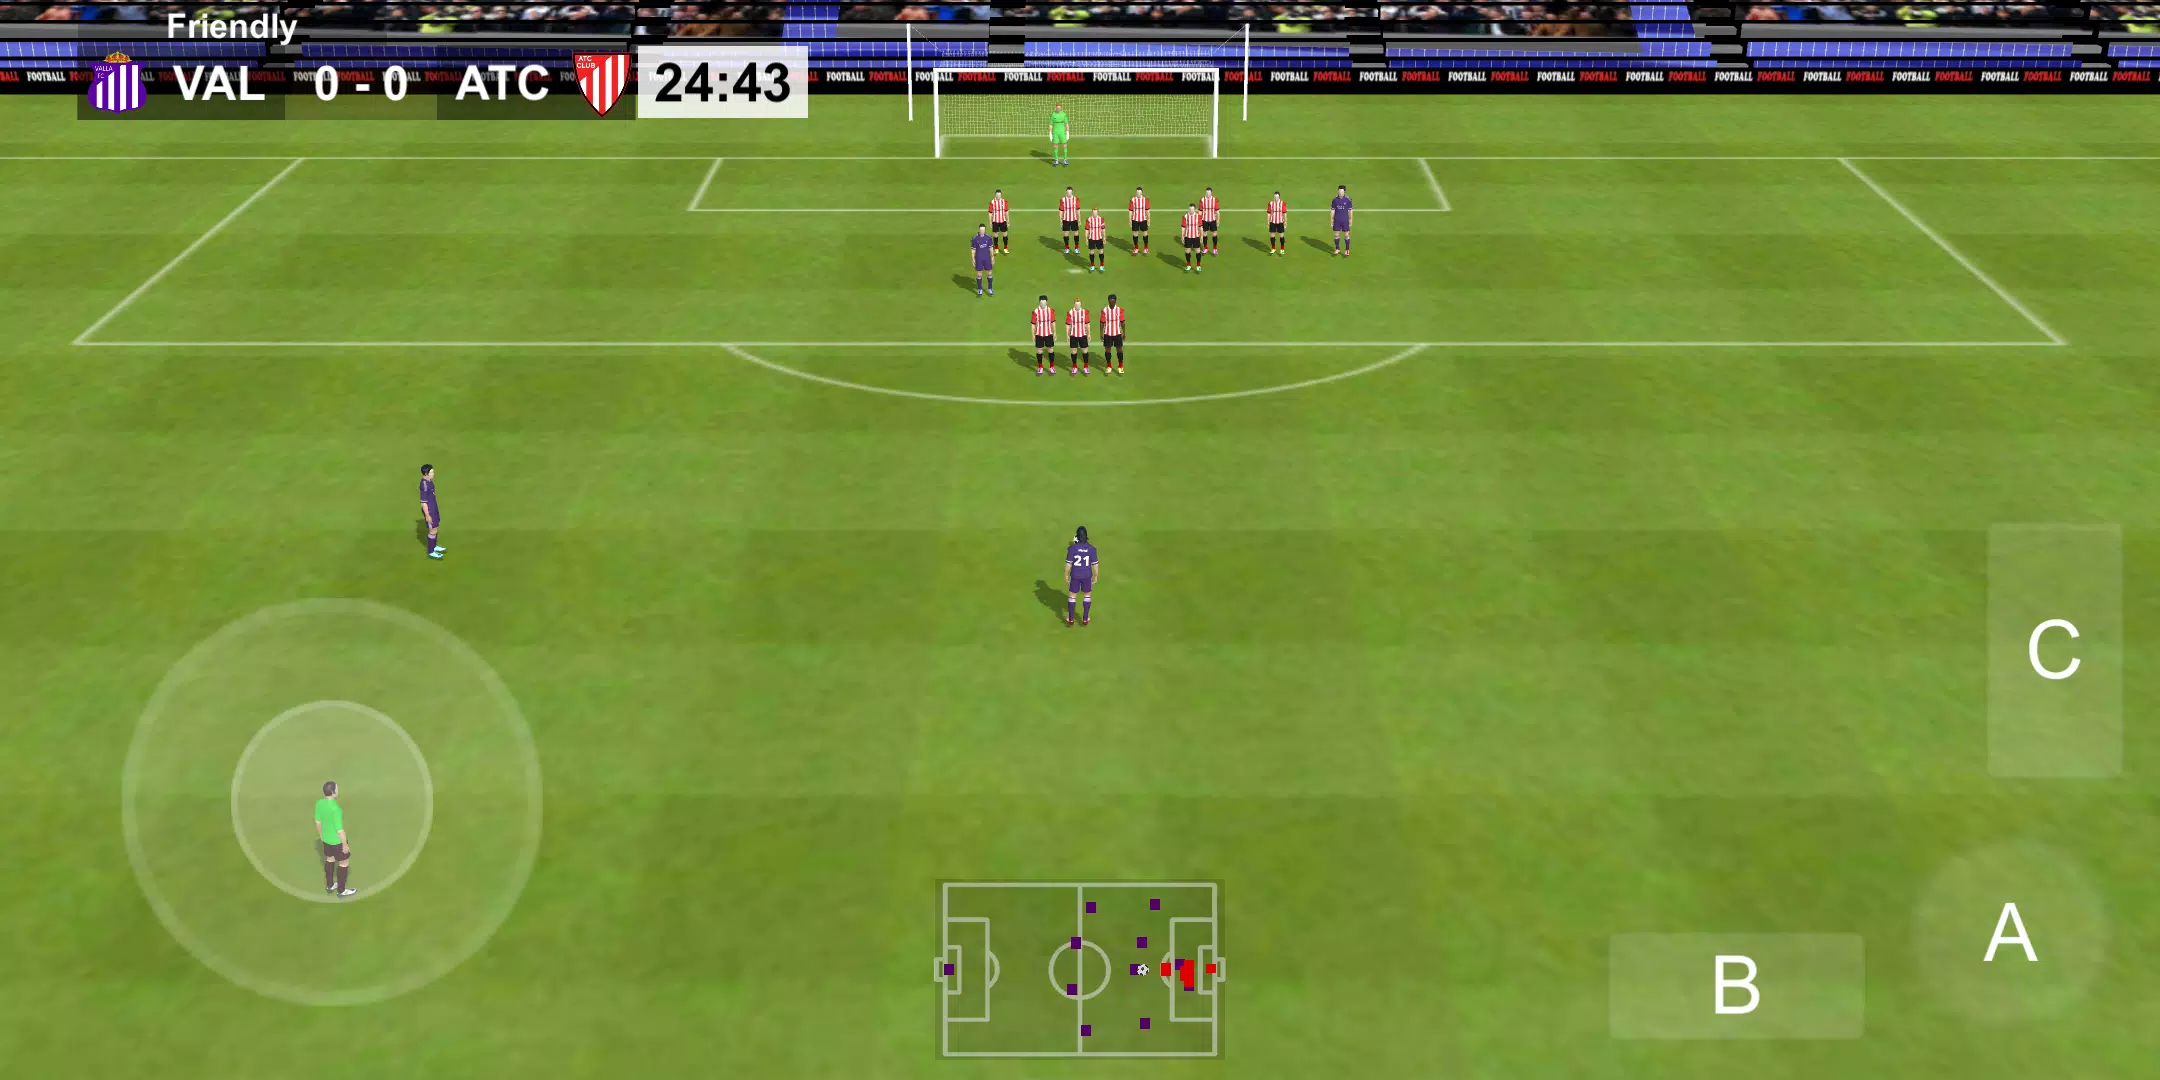 Football League 2024 - APK Download for Android